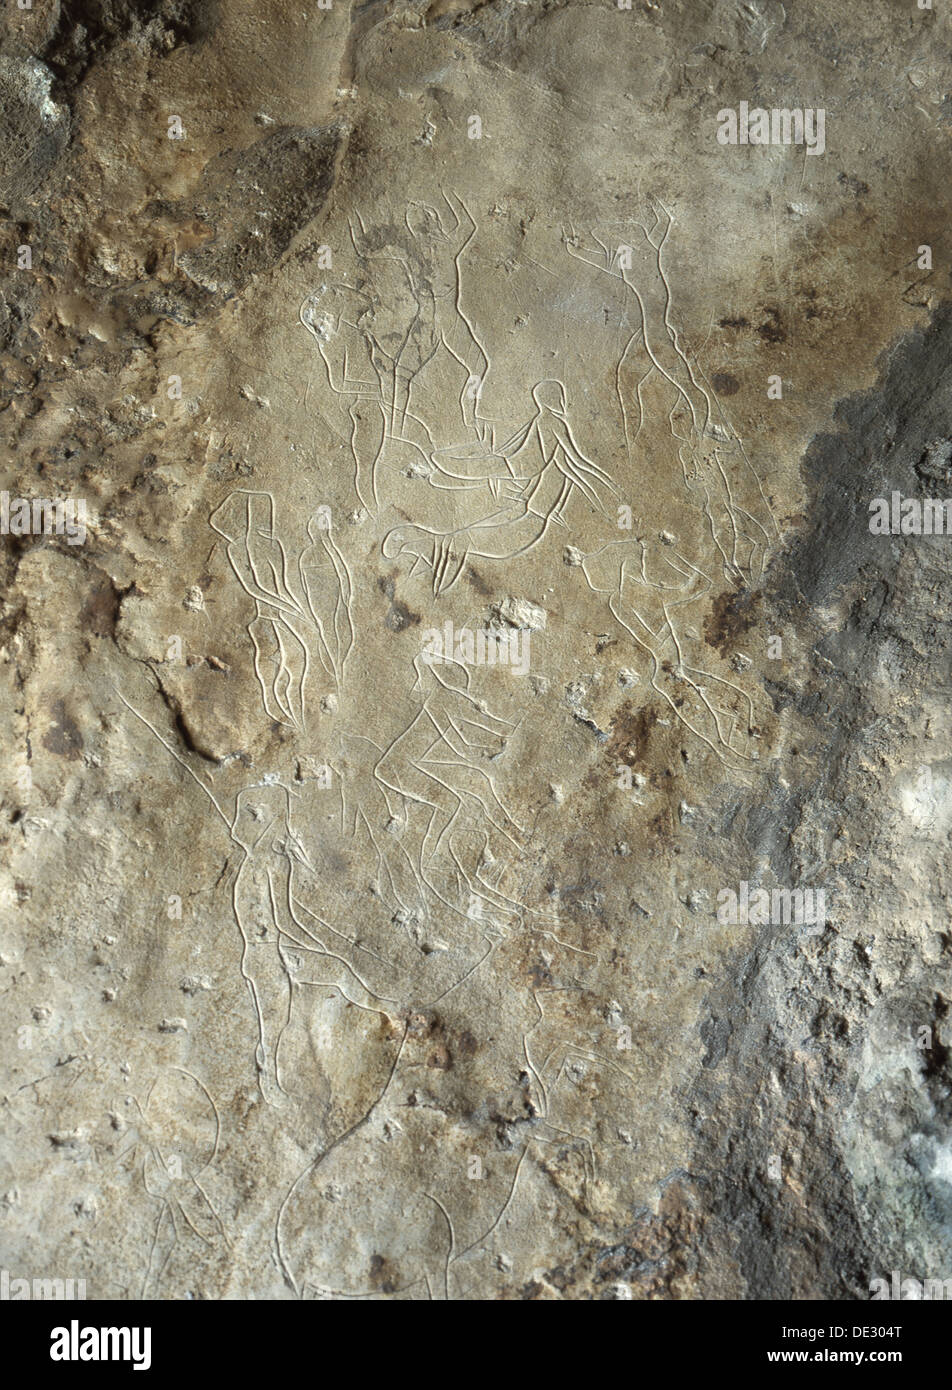 Images of male human figures engraved in limestone walls of the cave at Addaura. Stock Photo